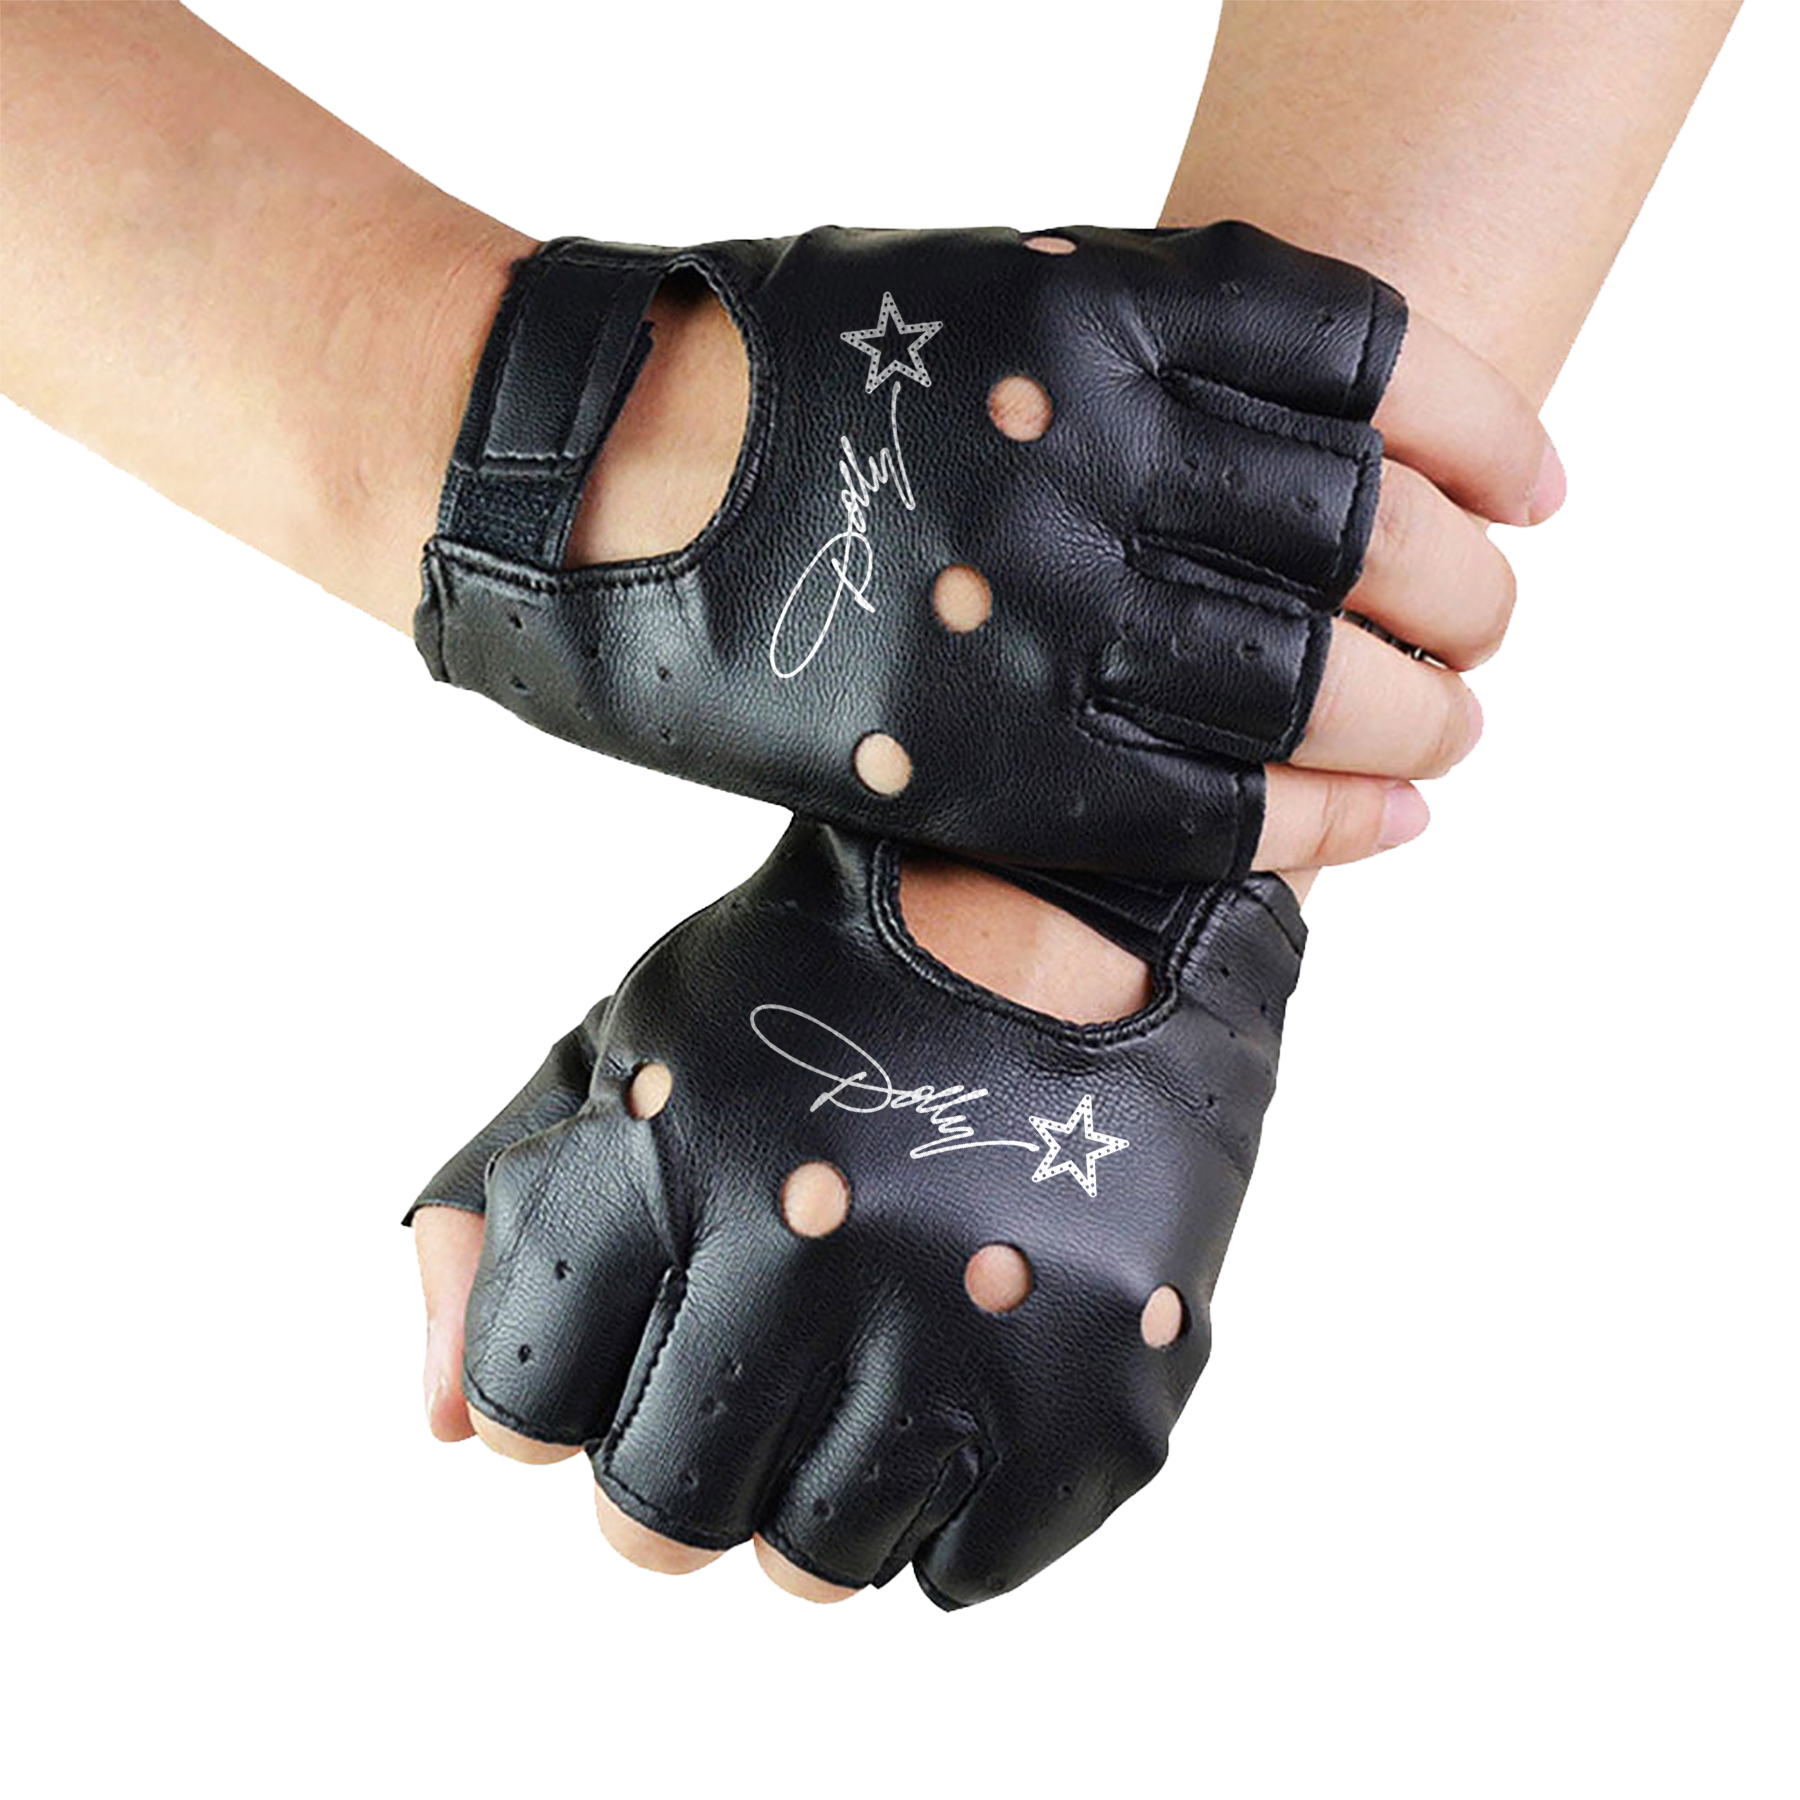 Official Dolly Parton Merchandise. PU leather fingerless gloves featuring the Dolly Parton Rockstar logo. Finish off your rocker look with this iconic gloves.